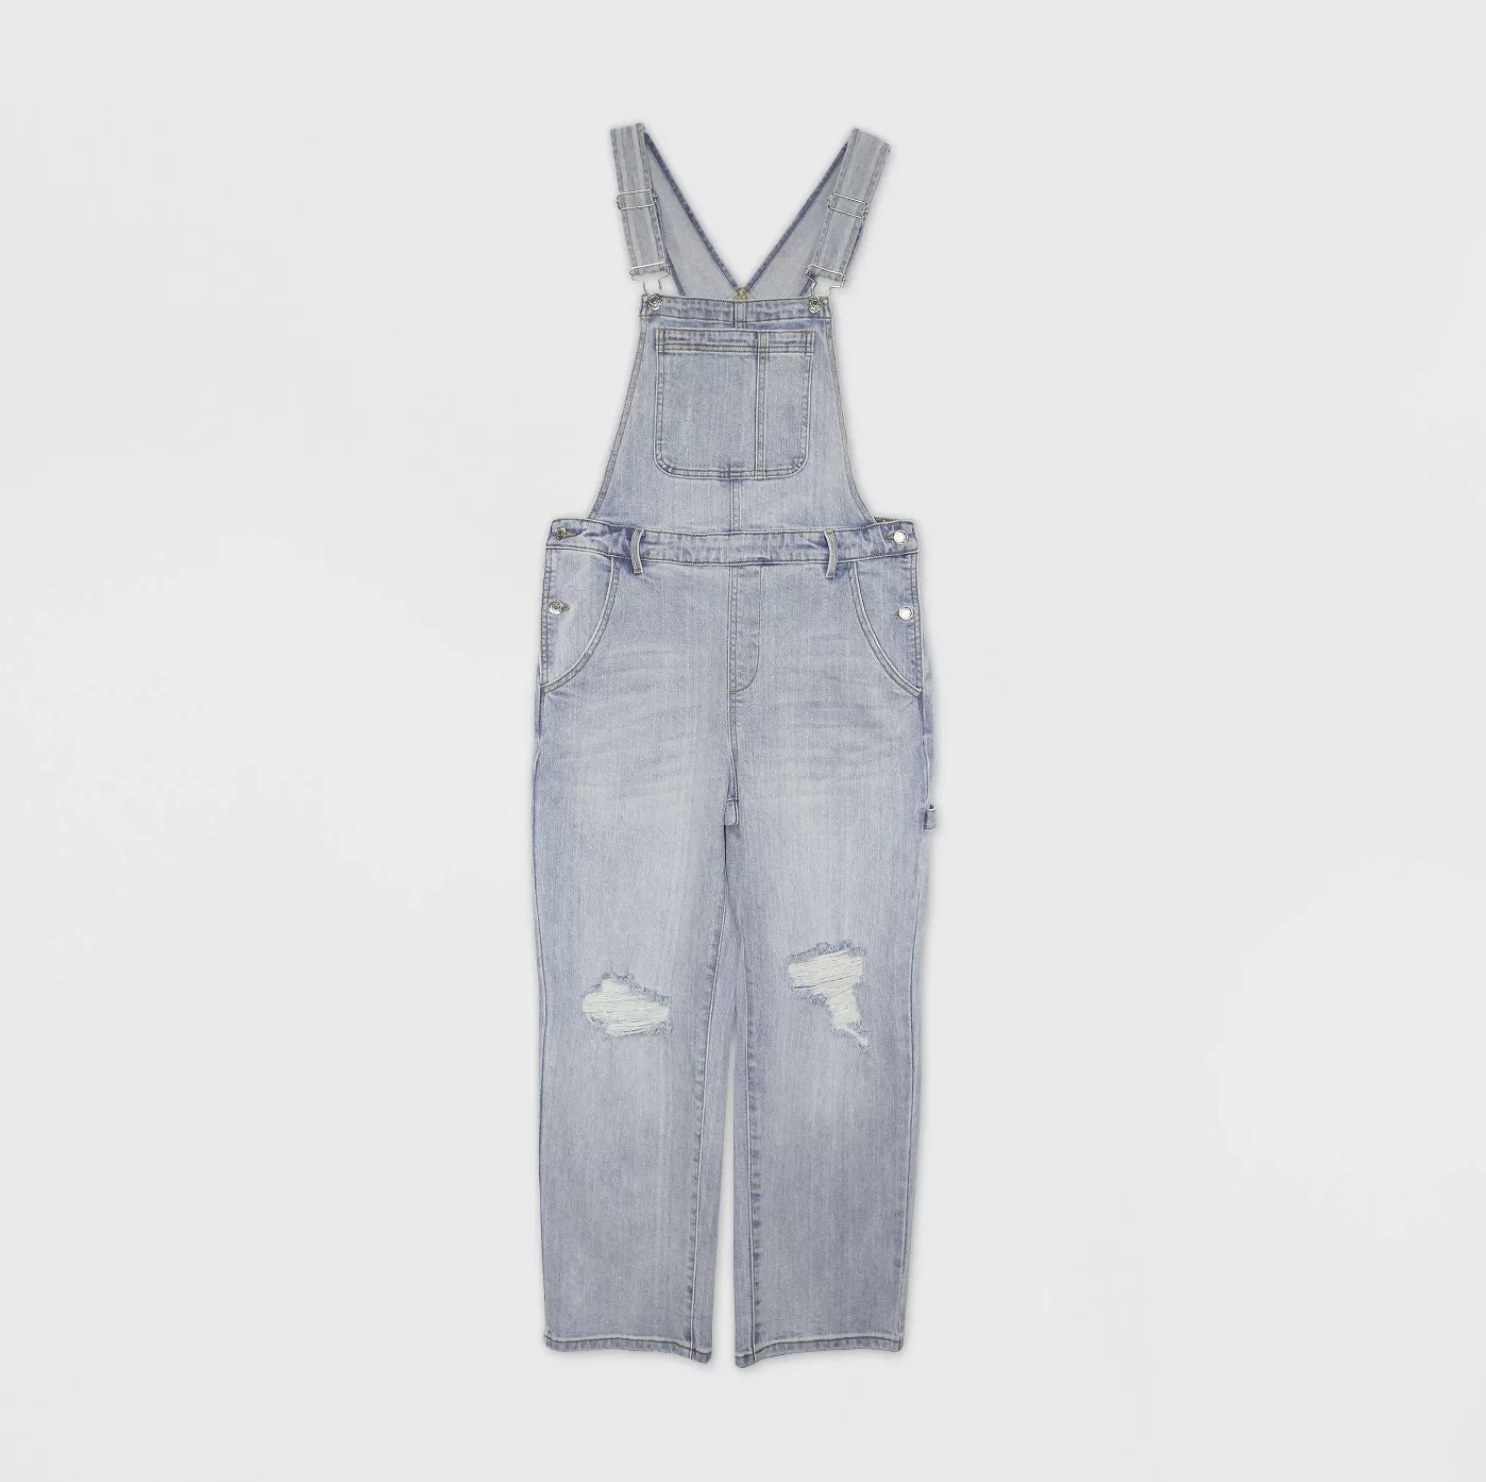 A light wash denim overall with frayed rips on the knees